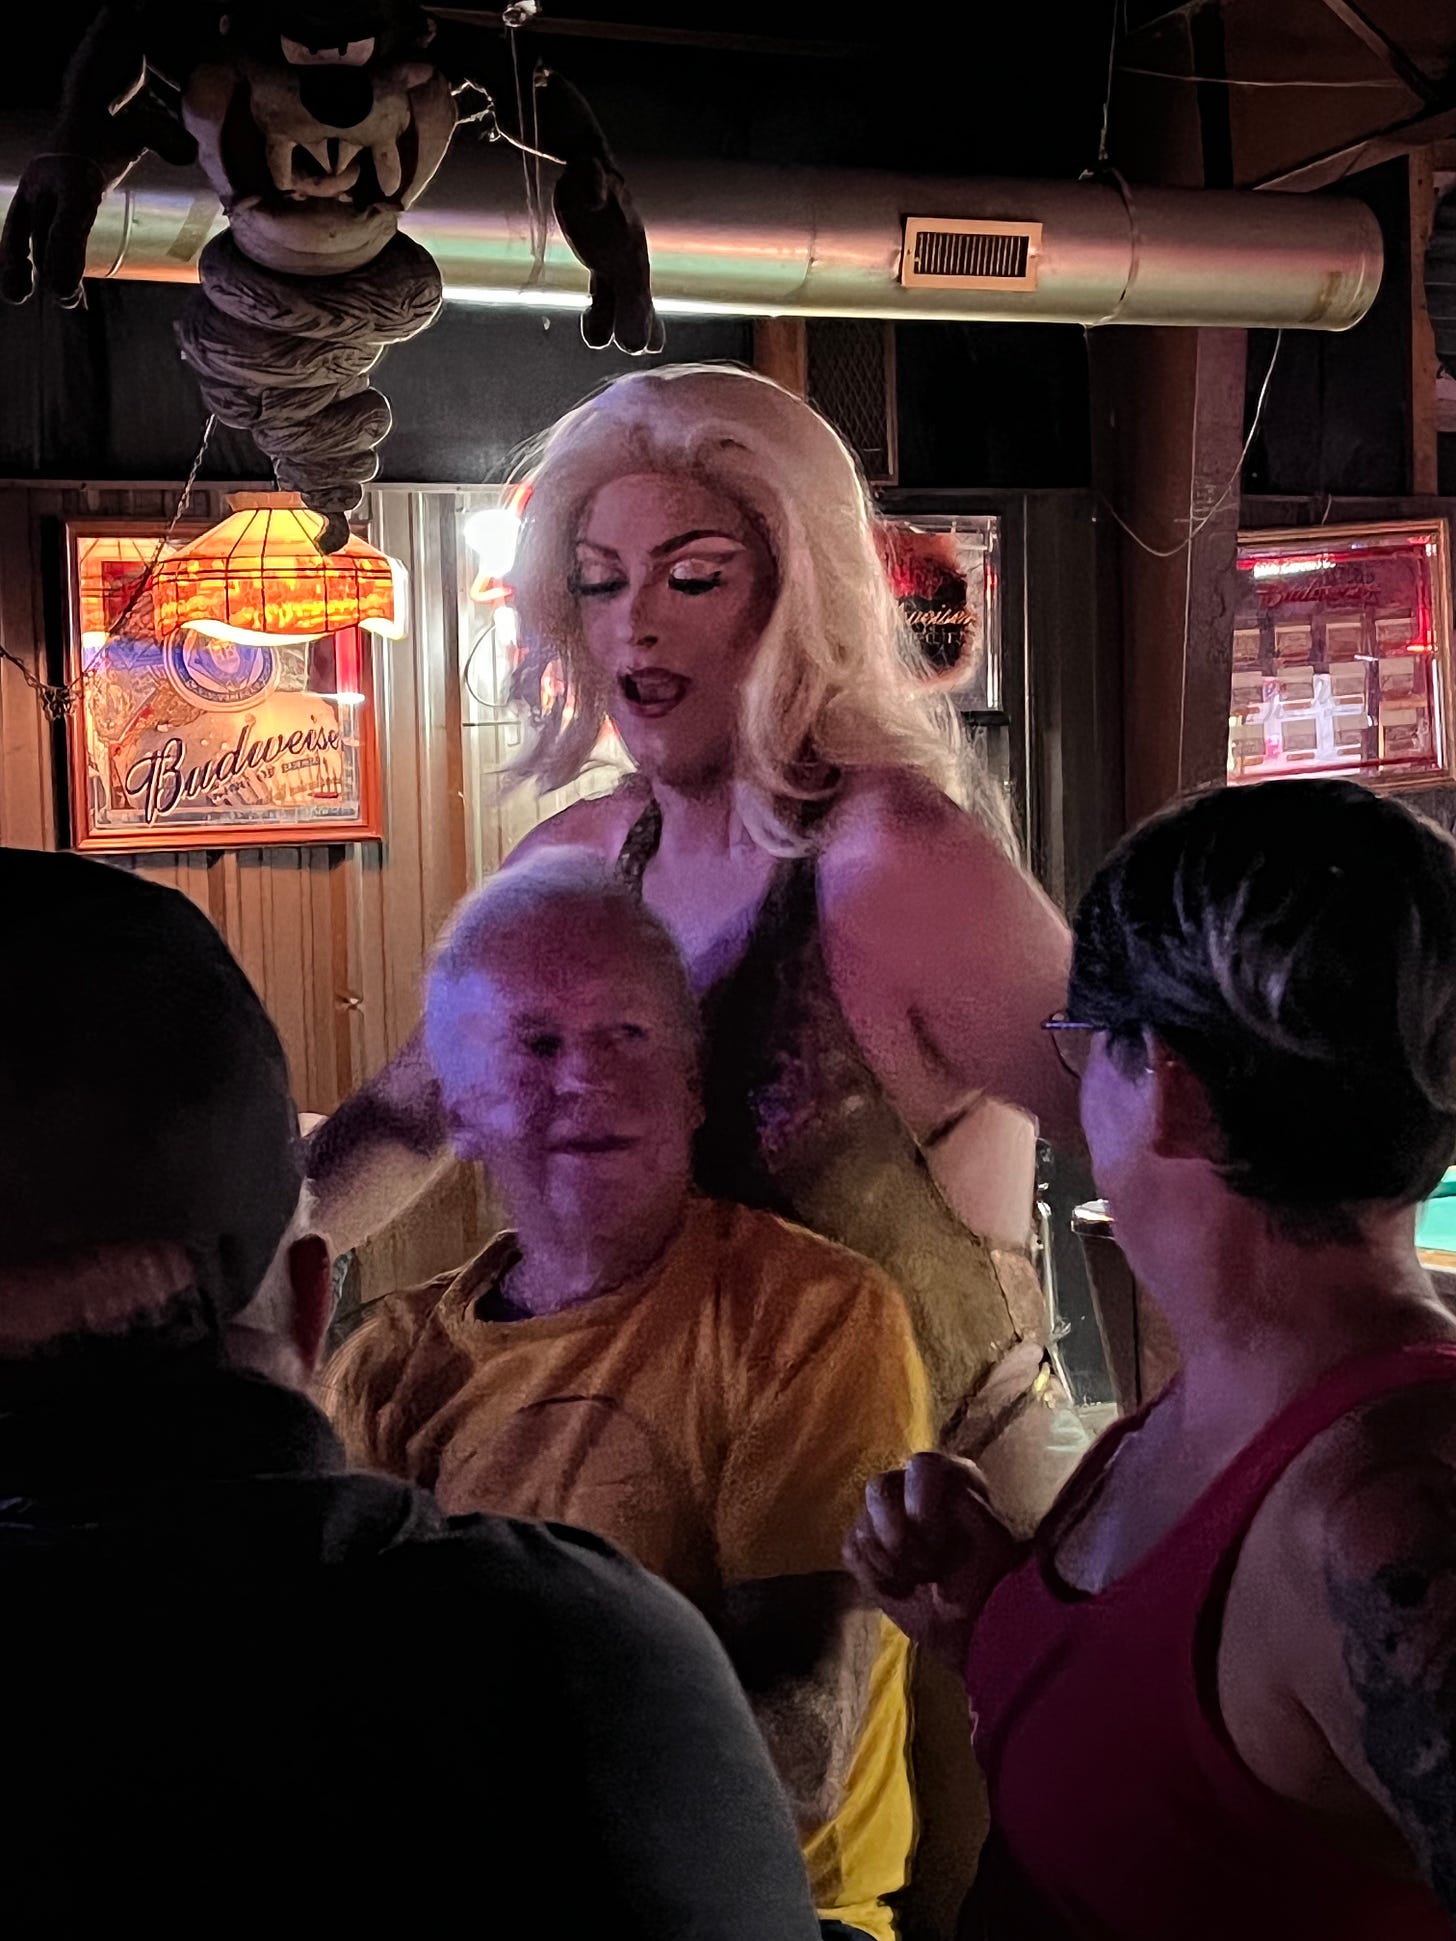 A drag queen with blonde hair and a sparkly top stands behind an older male bar patron and flirts with him.